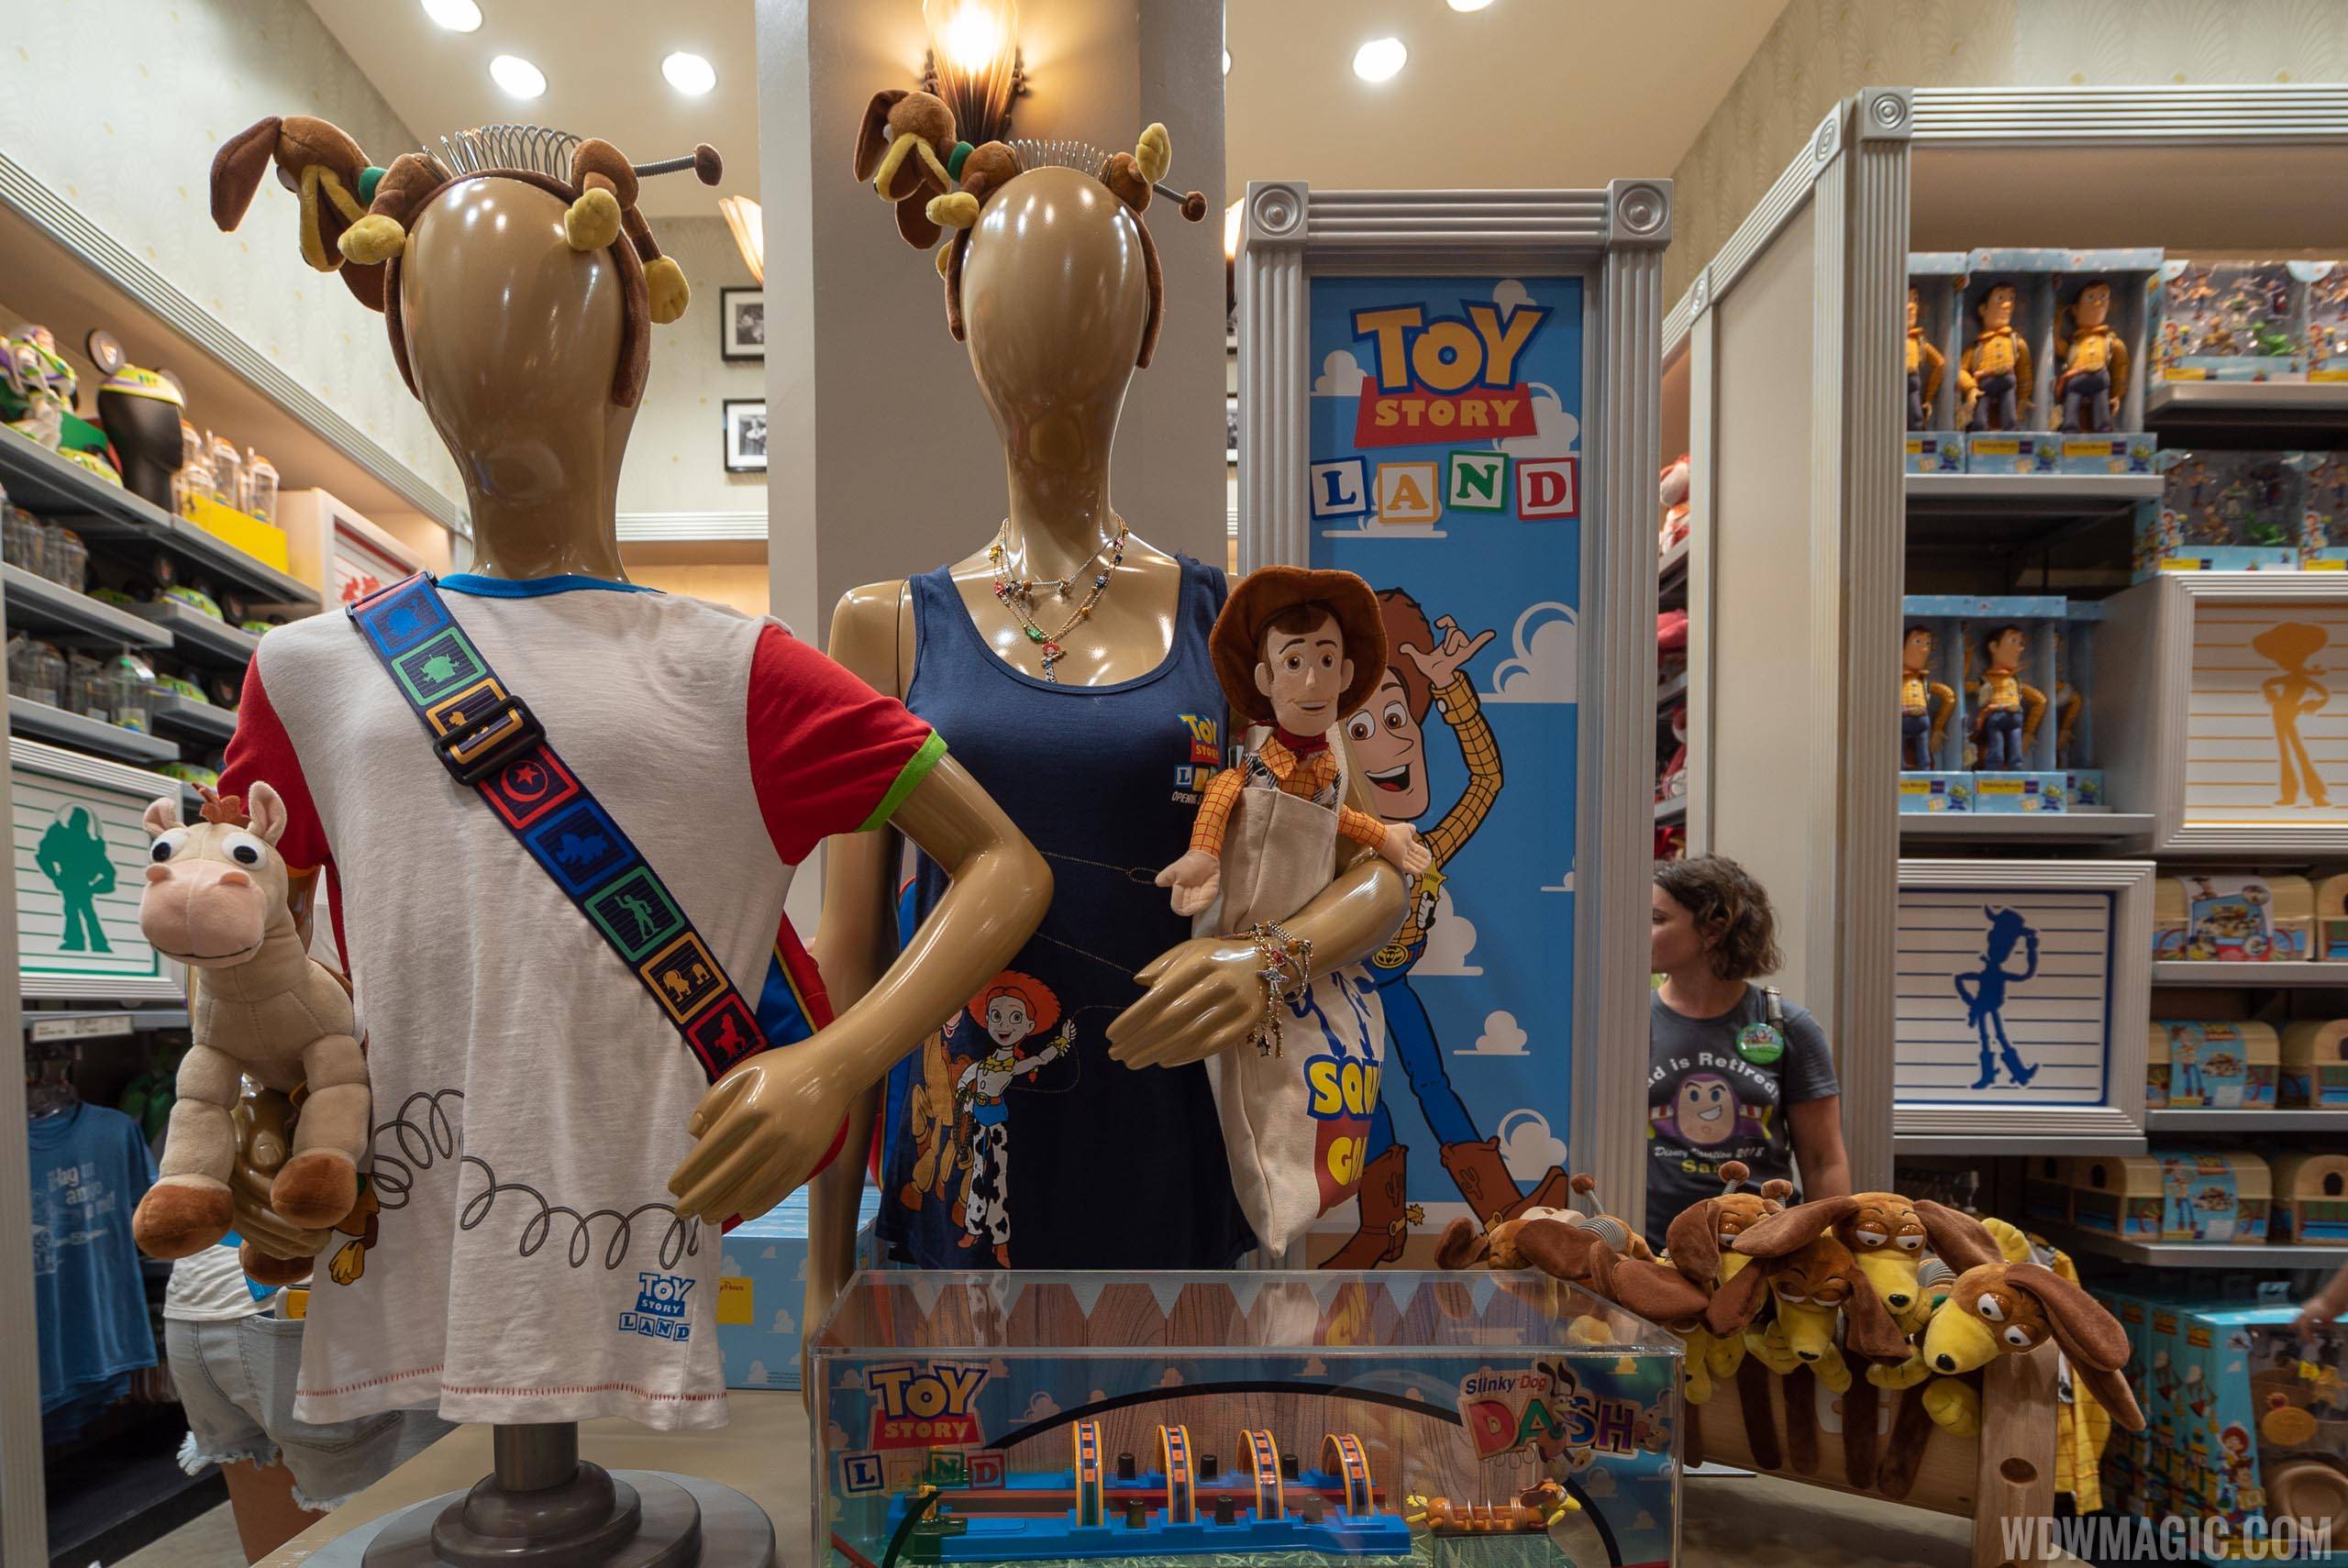 Beverly Sunset Toy Story store